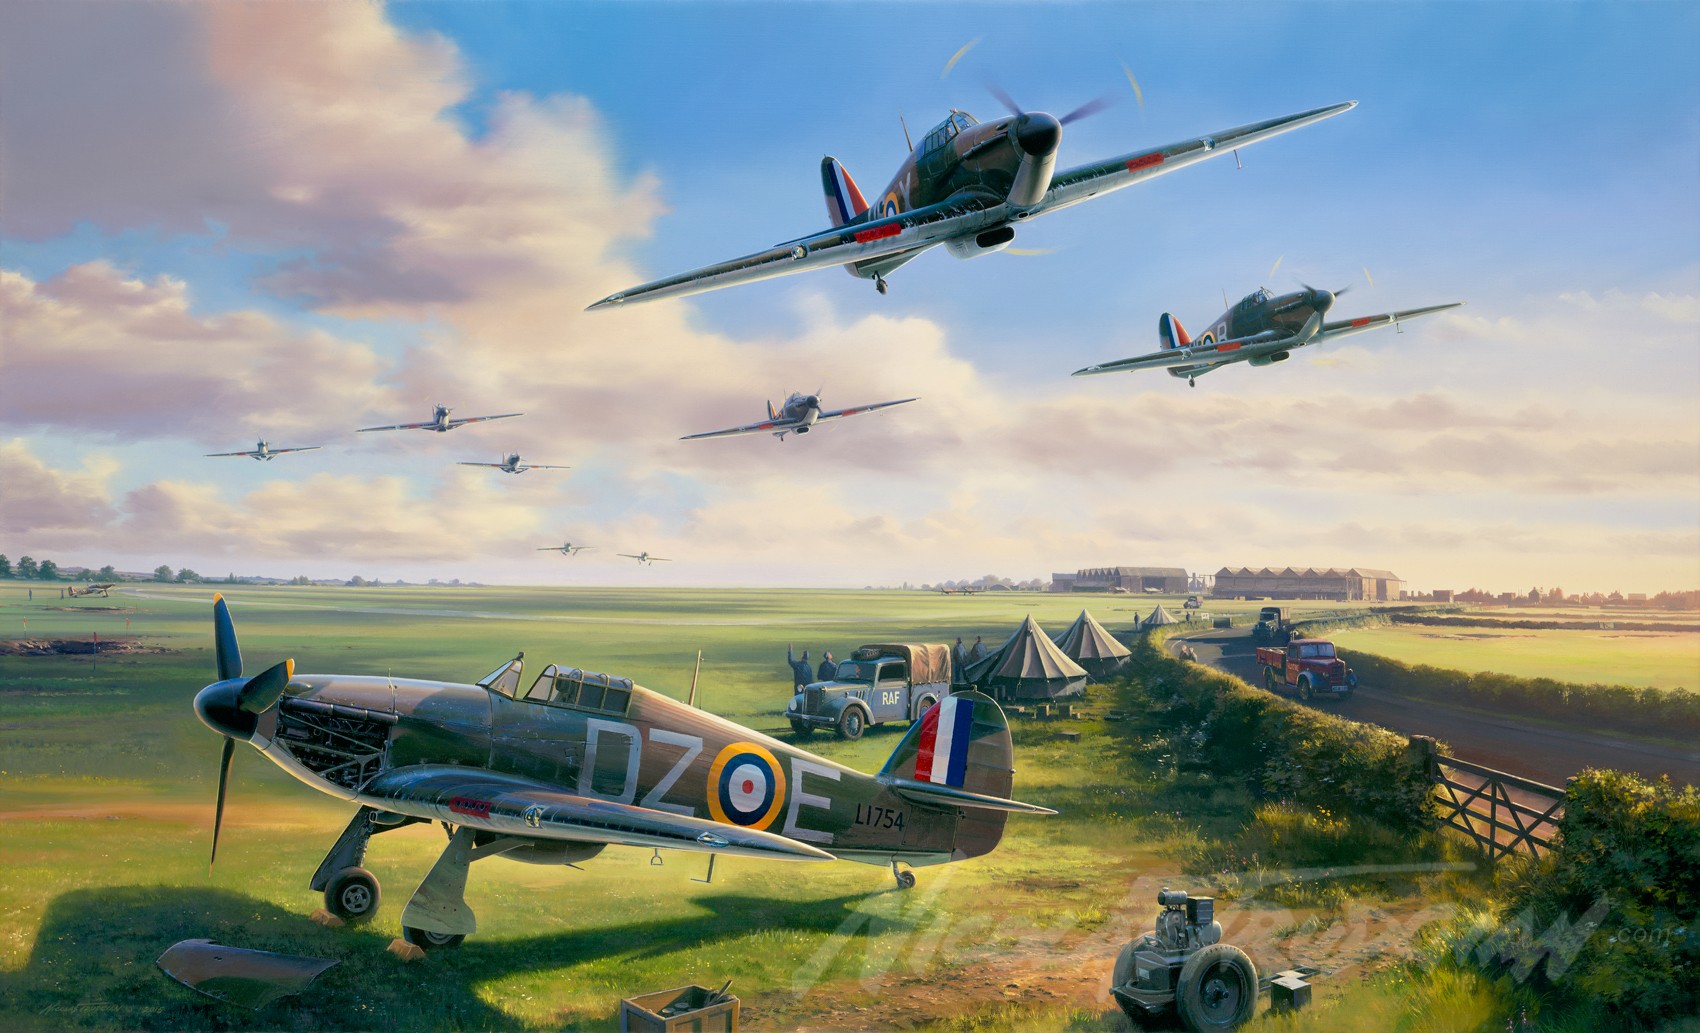 Wallpaper, vehicle, airplane, military aircraft, World War II, air force, Battle of Britain, Royal Airforce, Hawker Hurricane, Flight, Takeoff, atmosphere of earth, fighter aircraft, air show, aerobatics, general aviation, aircraft engine